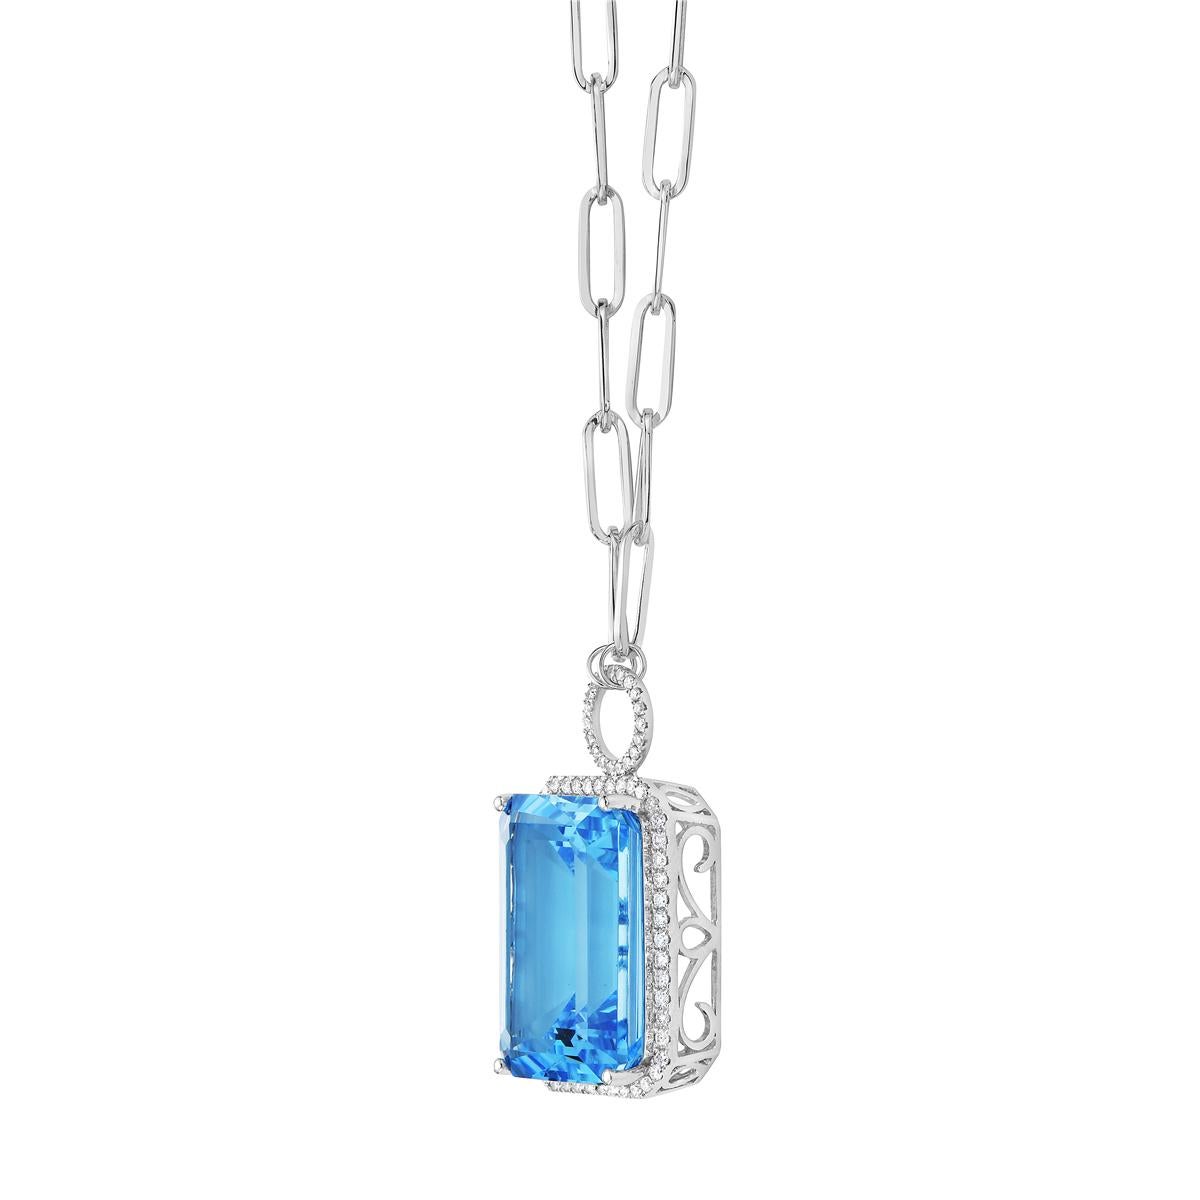 With this exquisite semi-precious Swiss blue topaz diamond necklace, style and glamour are in the spotlight. This 14-karat cushion cut necklace is made from 3.3 grams of gold, 1 sky blue topaz totaling 29.57 karats, and is surrounded by 69 round